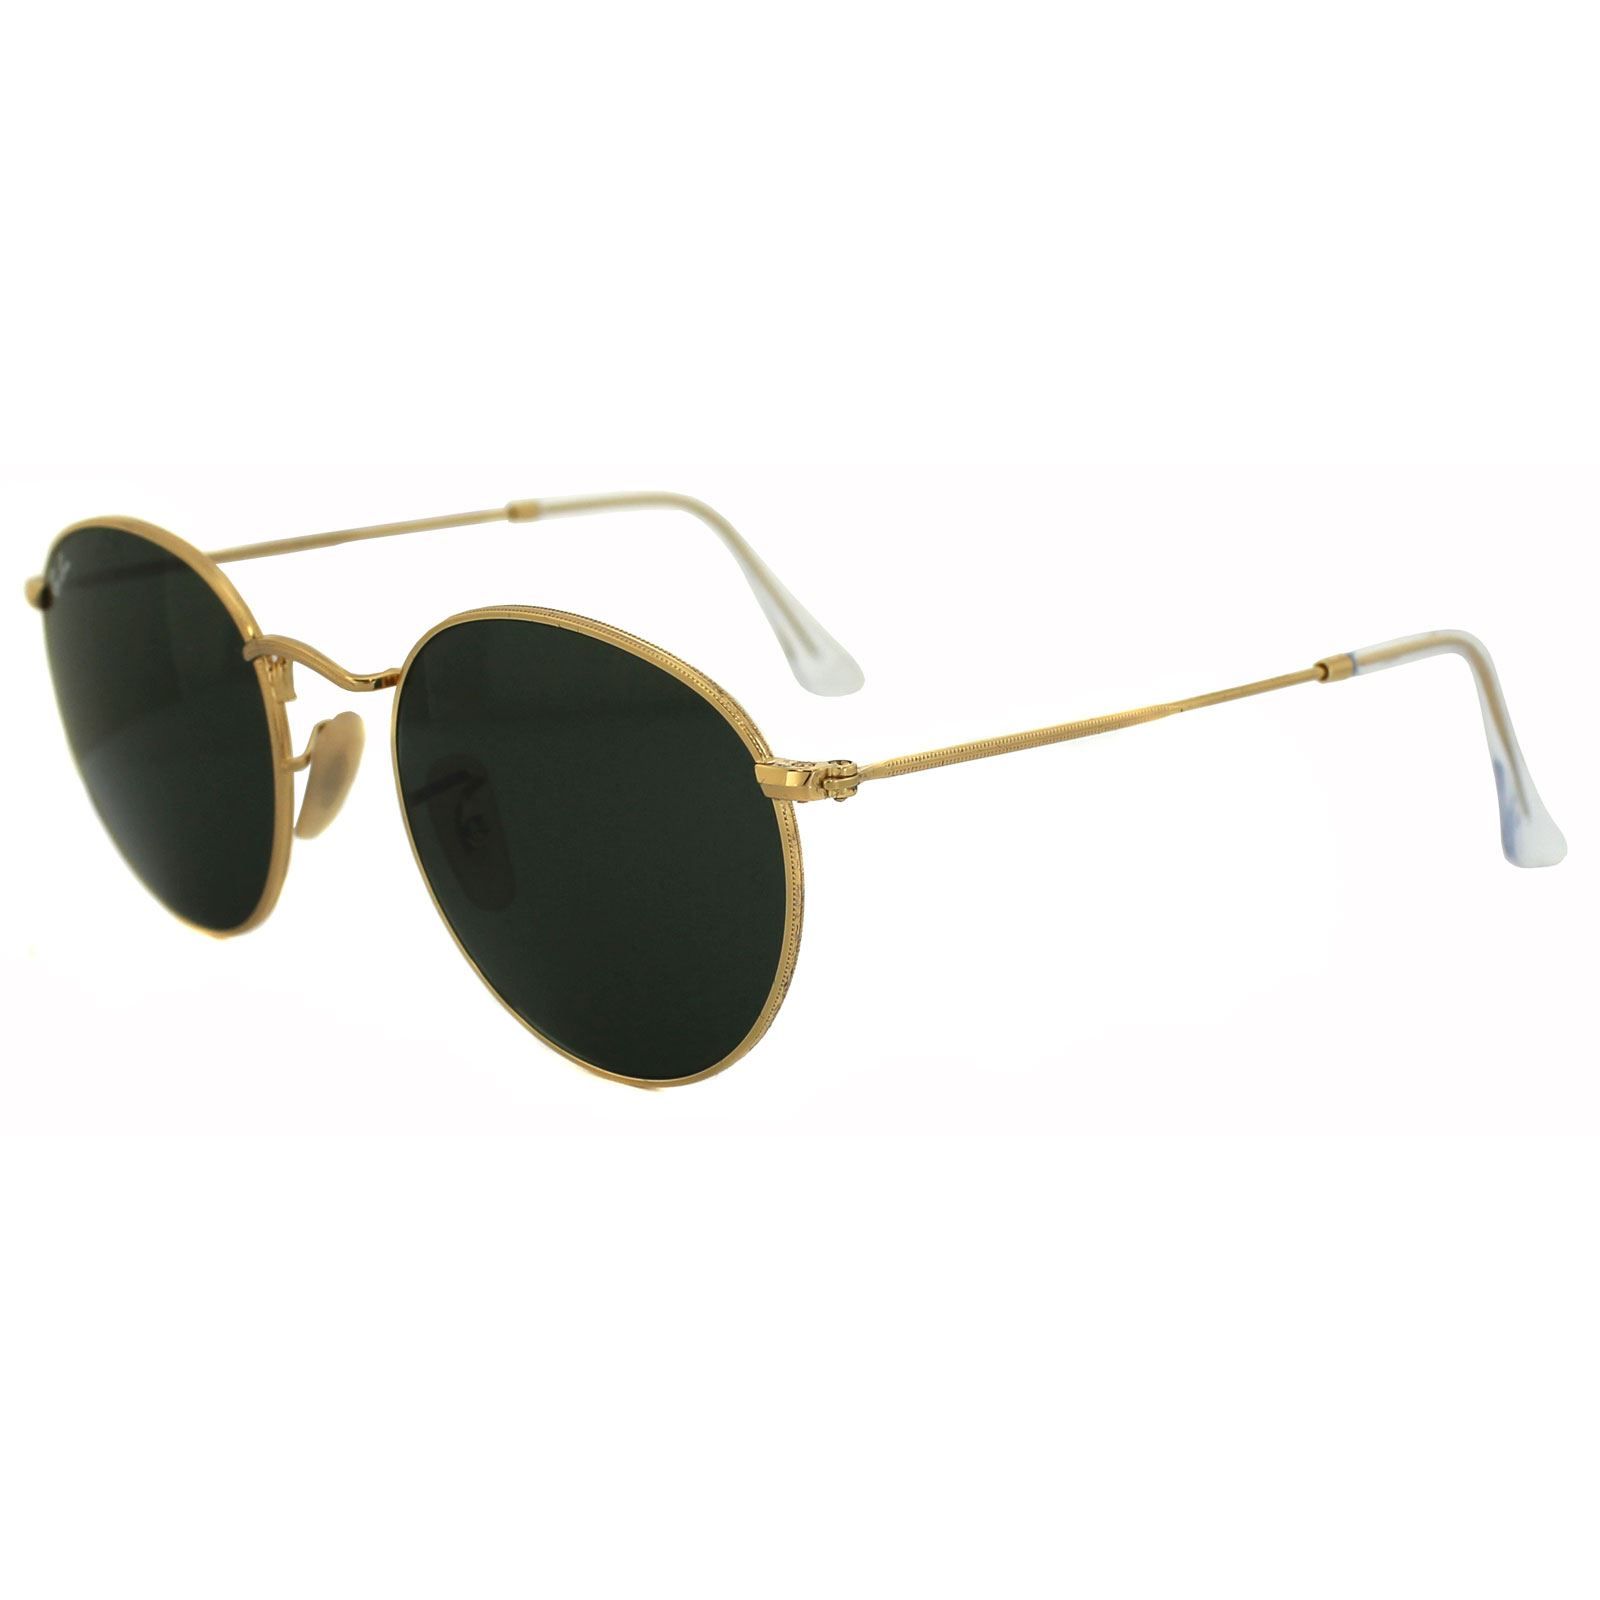 Ray-Ban Sunglasses Round Metal 3447 001 Gold Green 50mm are a rock and roll edged shades taking their inspiration from John Lennon and many other rock stars who have worn this shape since. Round and quirky makes for an awesome sunglass that transcends any fashion trends